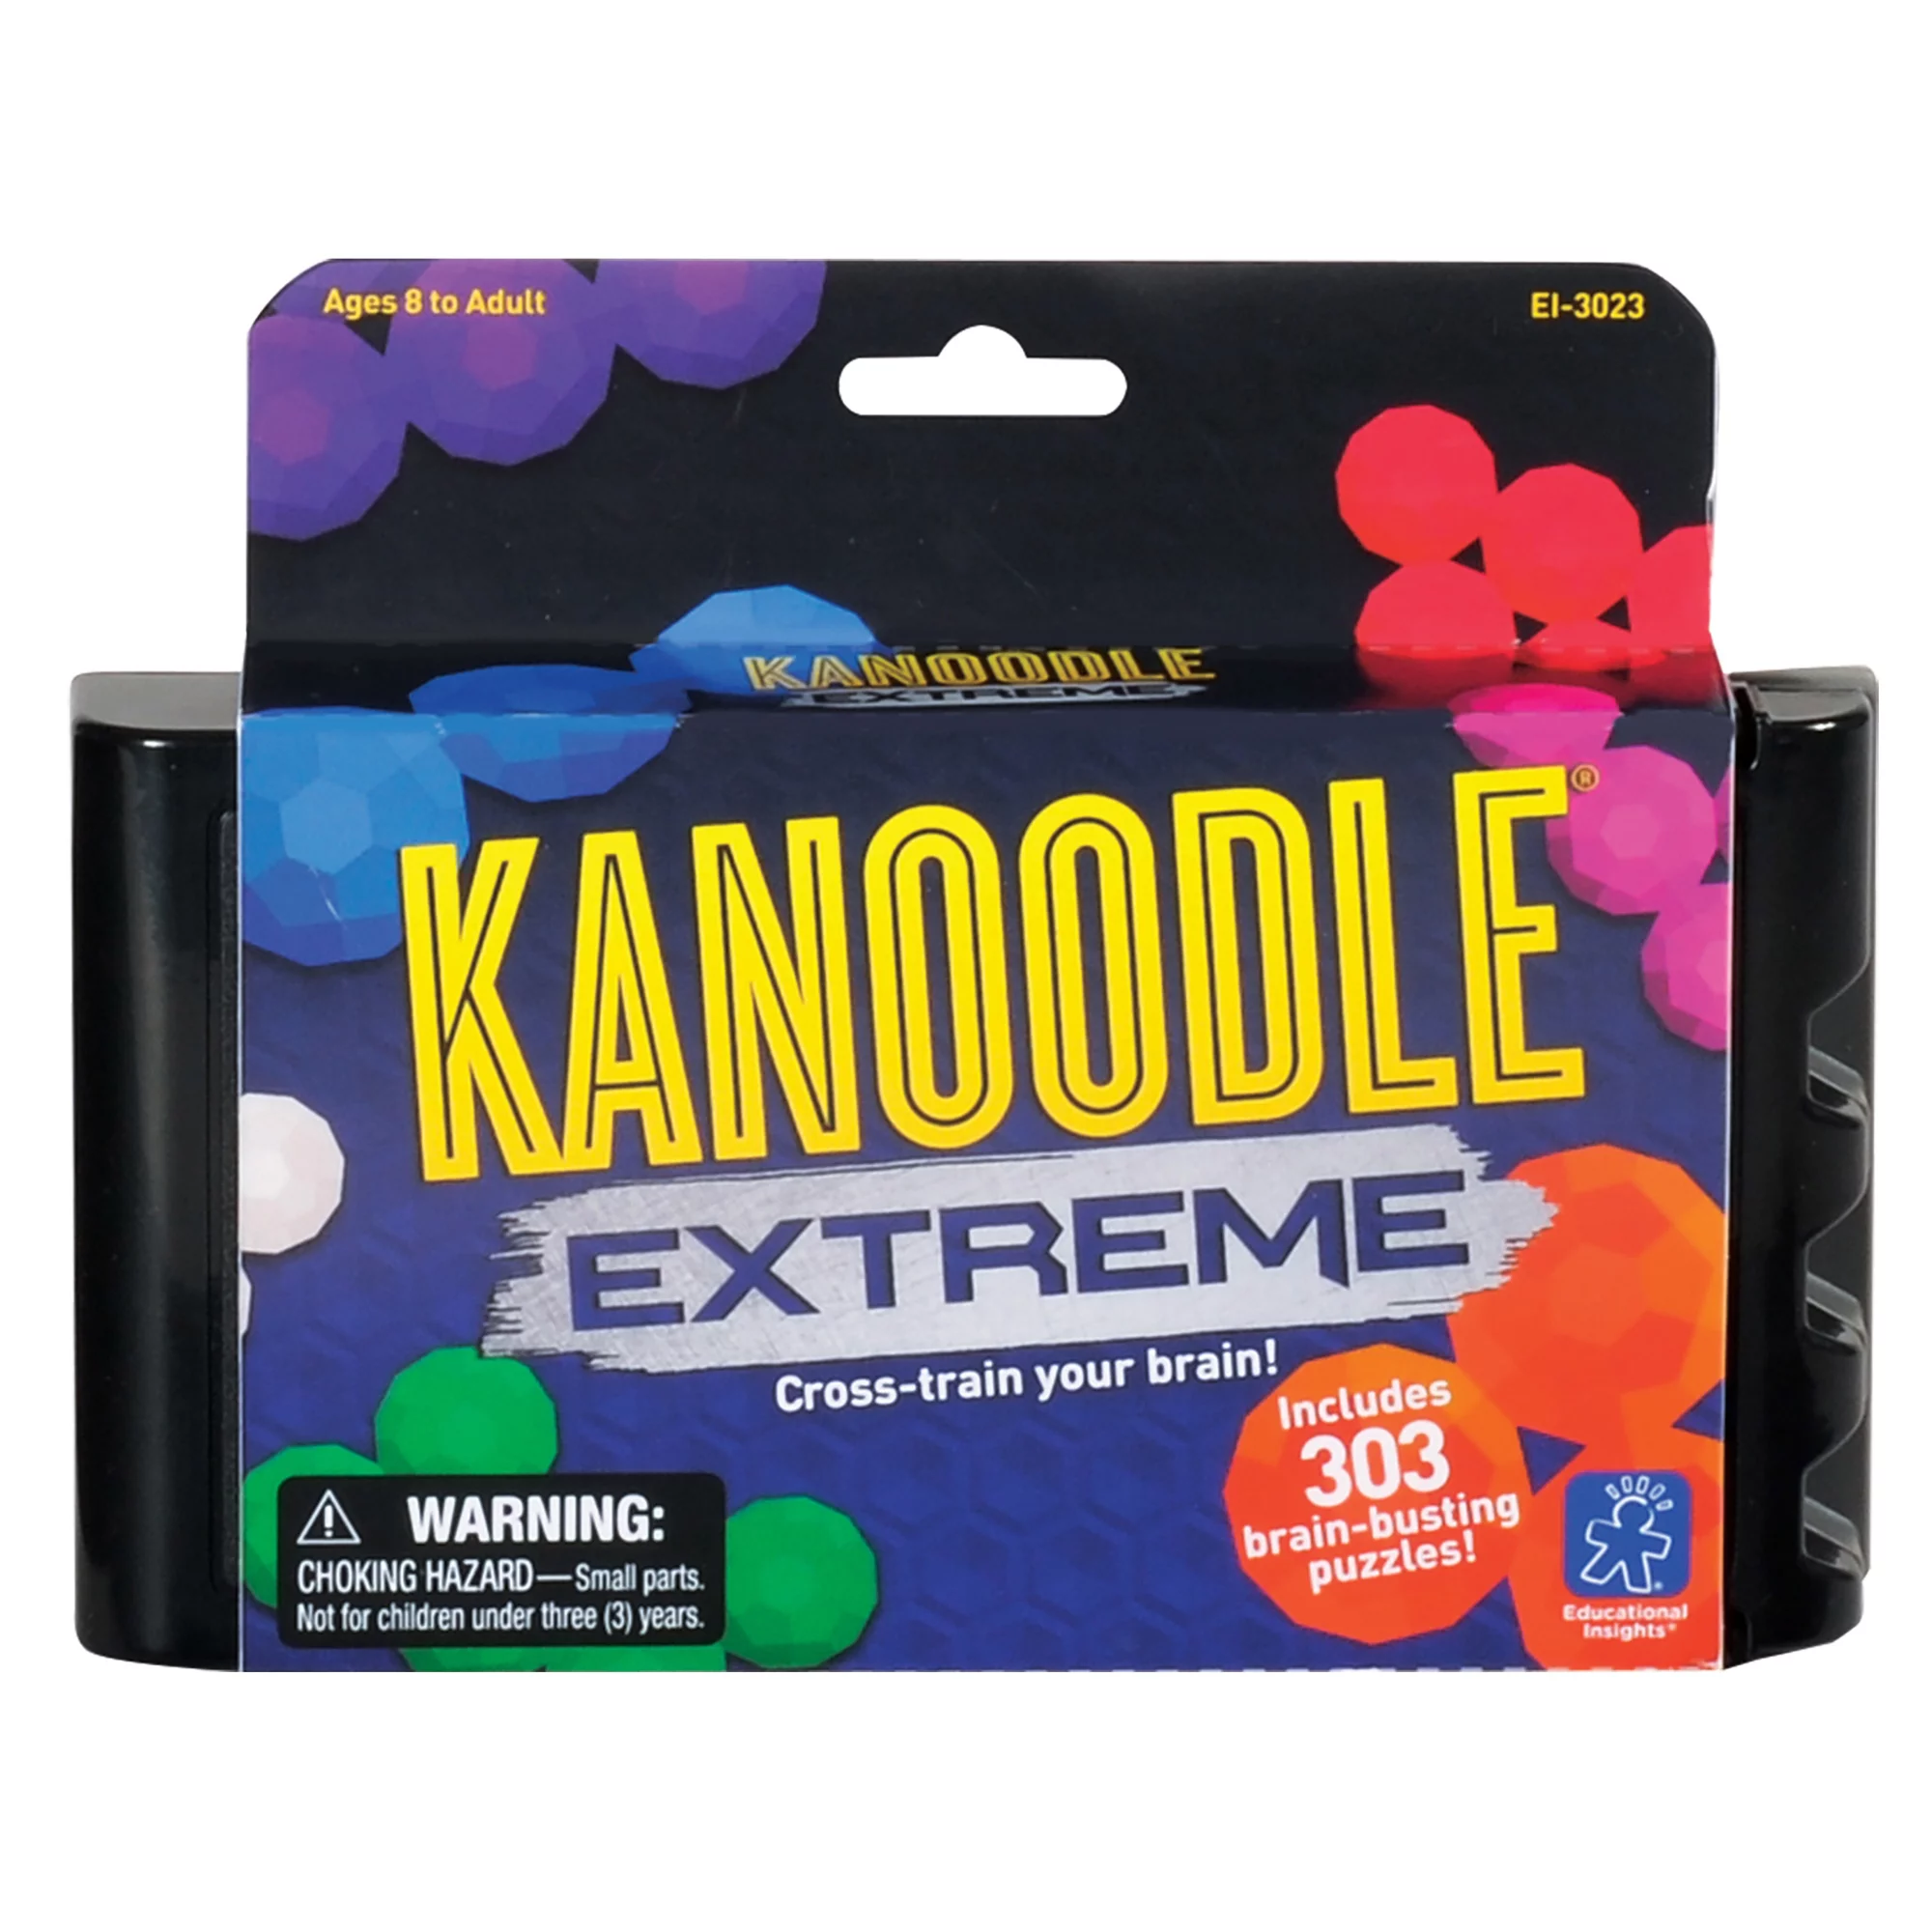 KANOODLE EXTREME Solutions